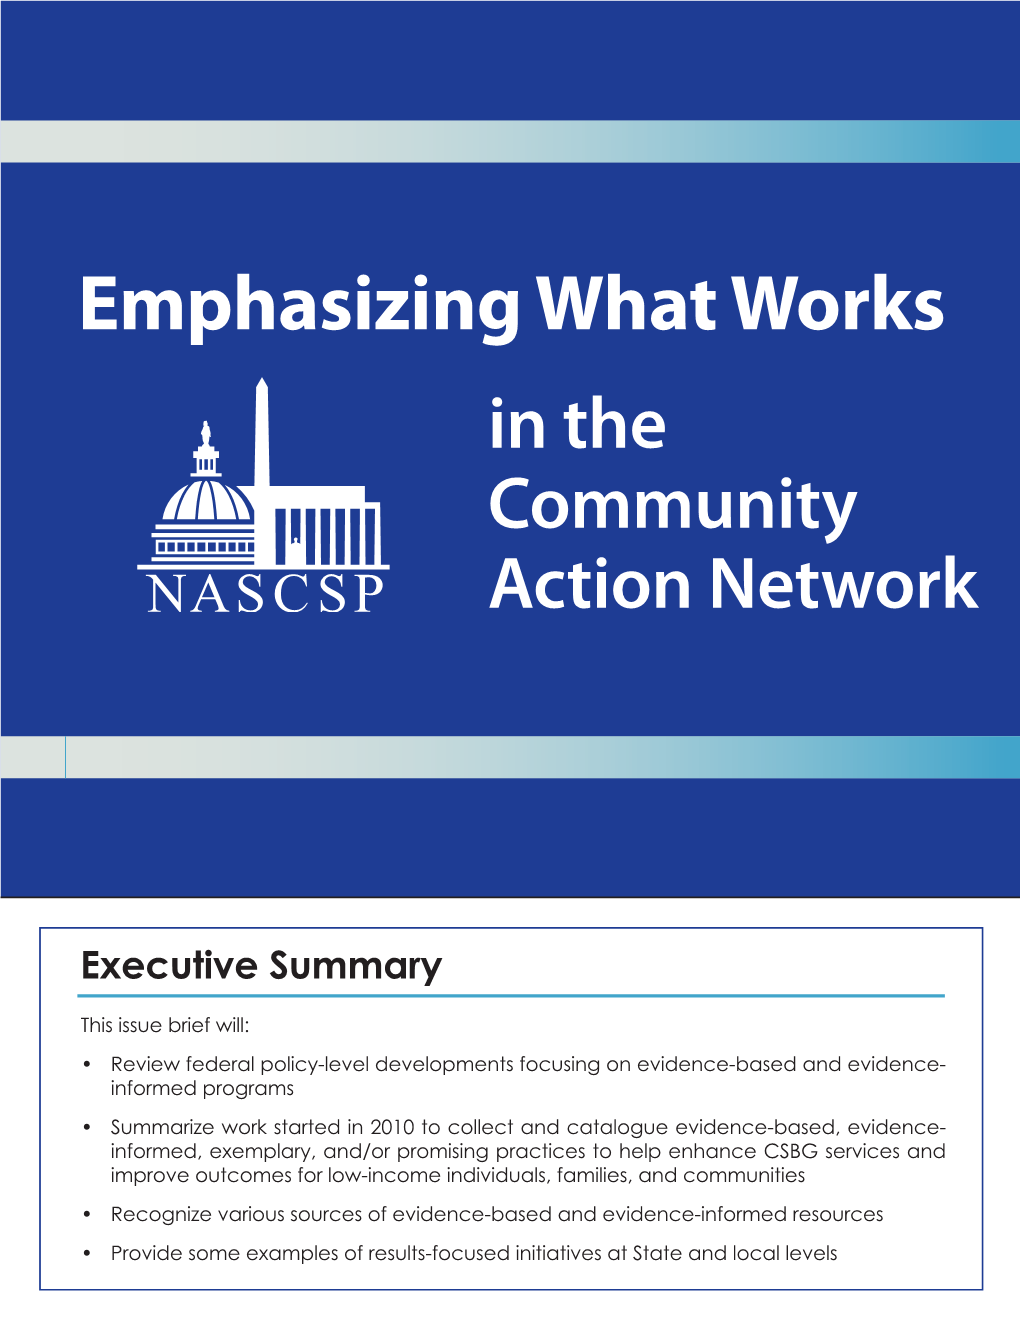 Emphasizing What Works in the Community Action Network